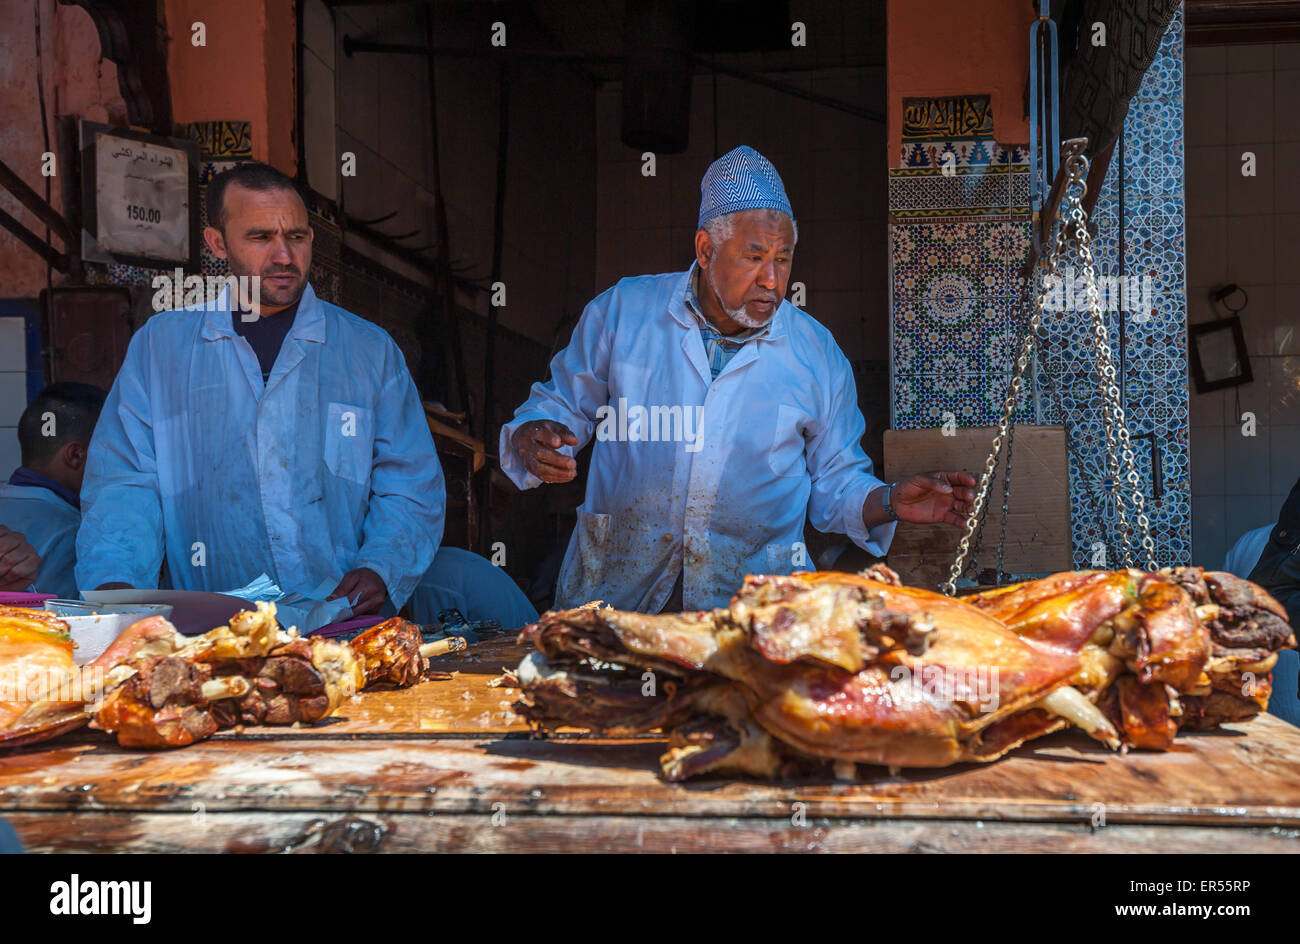 MARRAKESH, MOROCCO - April, 09, 2013: Sellers of roasted lamb in Marrakesh, Morocco Stock Photo